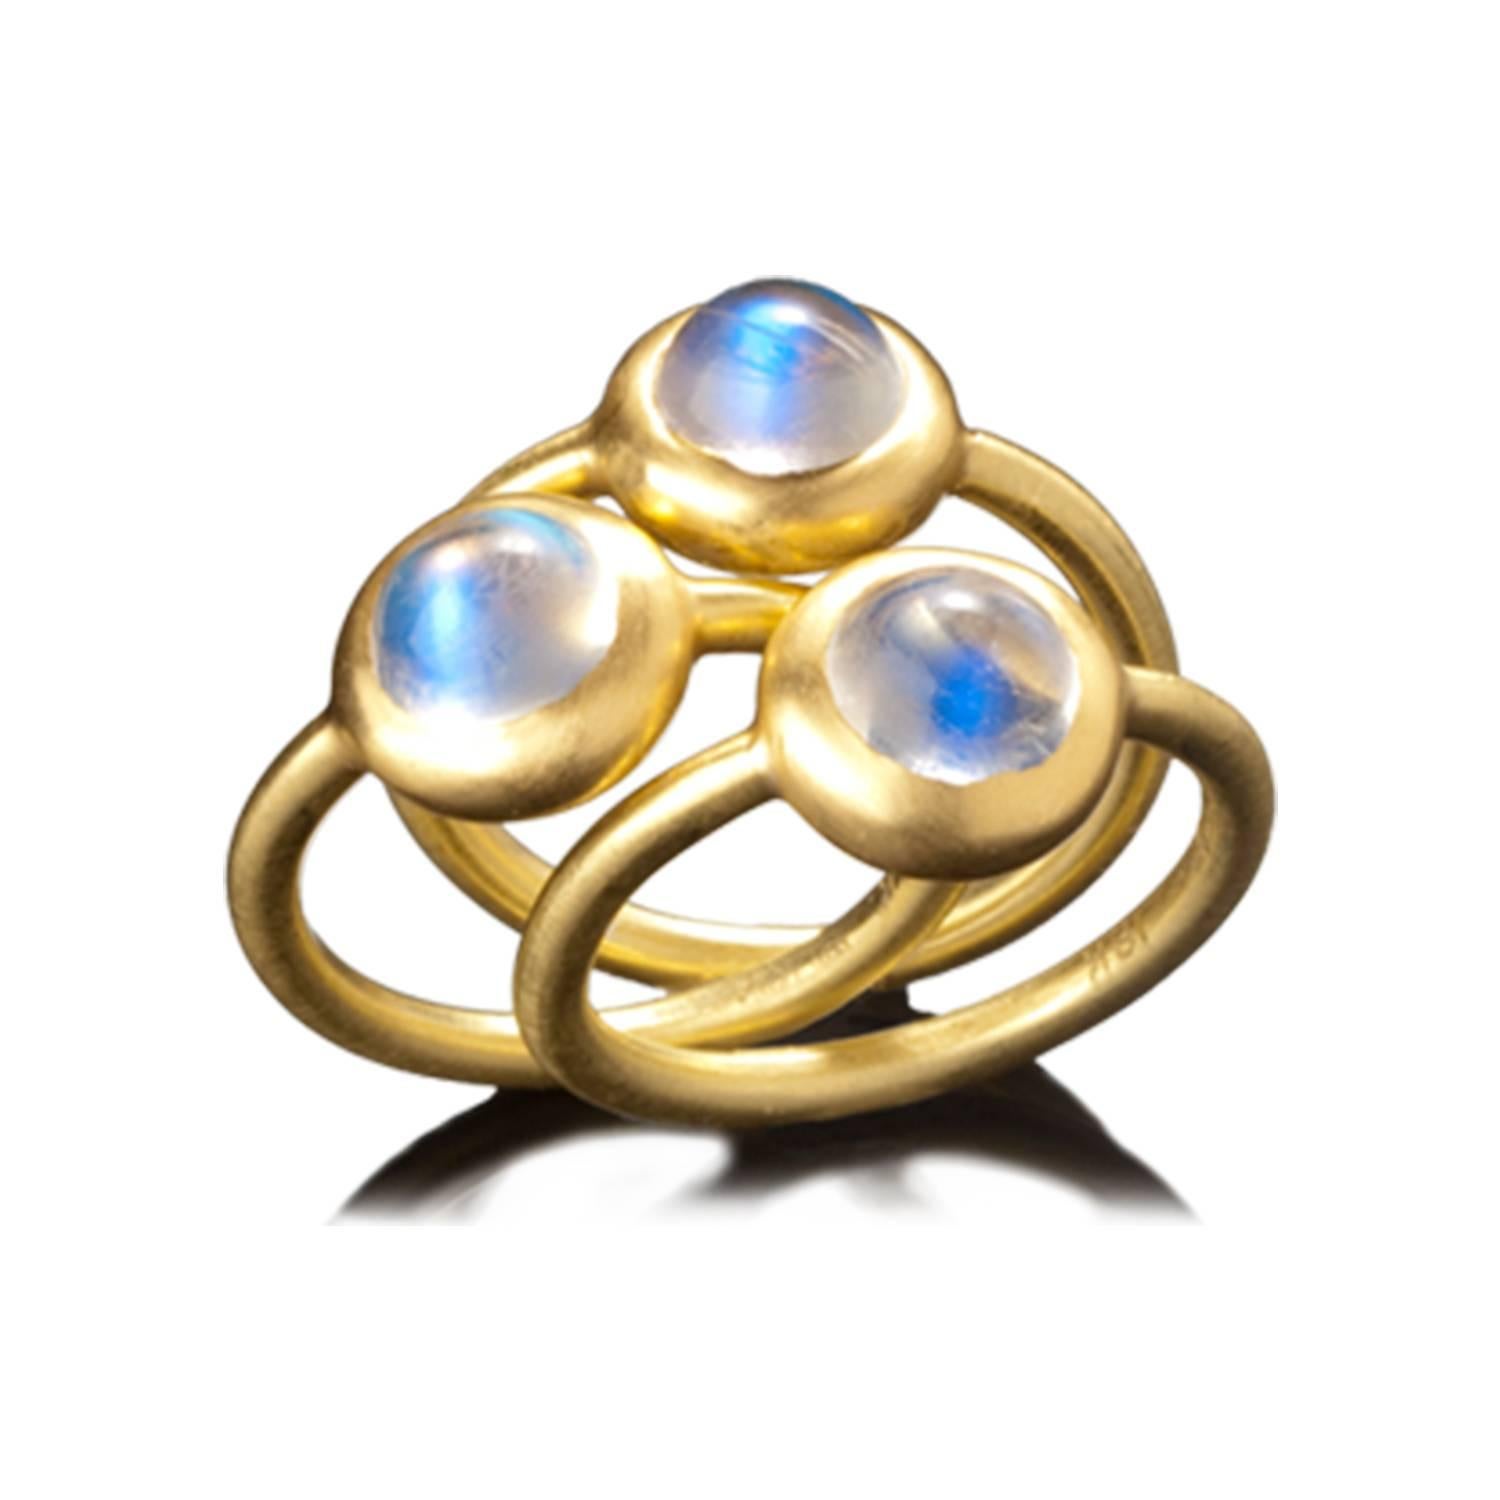 Moonstone has fascinated us for centuries with its remarkable properties of adularescence, the ability of light to enter the stone and create a shimmering  aura. Faye Kim's Ceylon moonstone ring in an 18k gold contemporary setting is simple with a